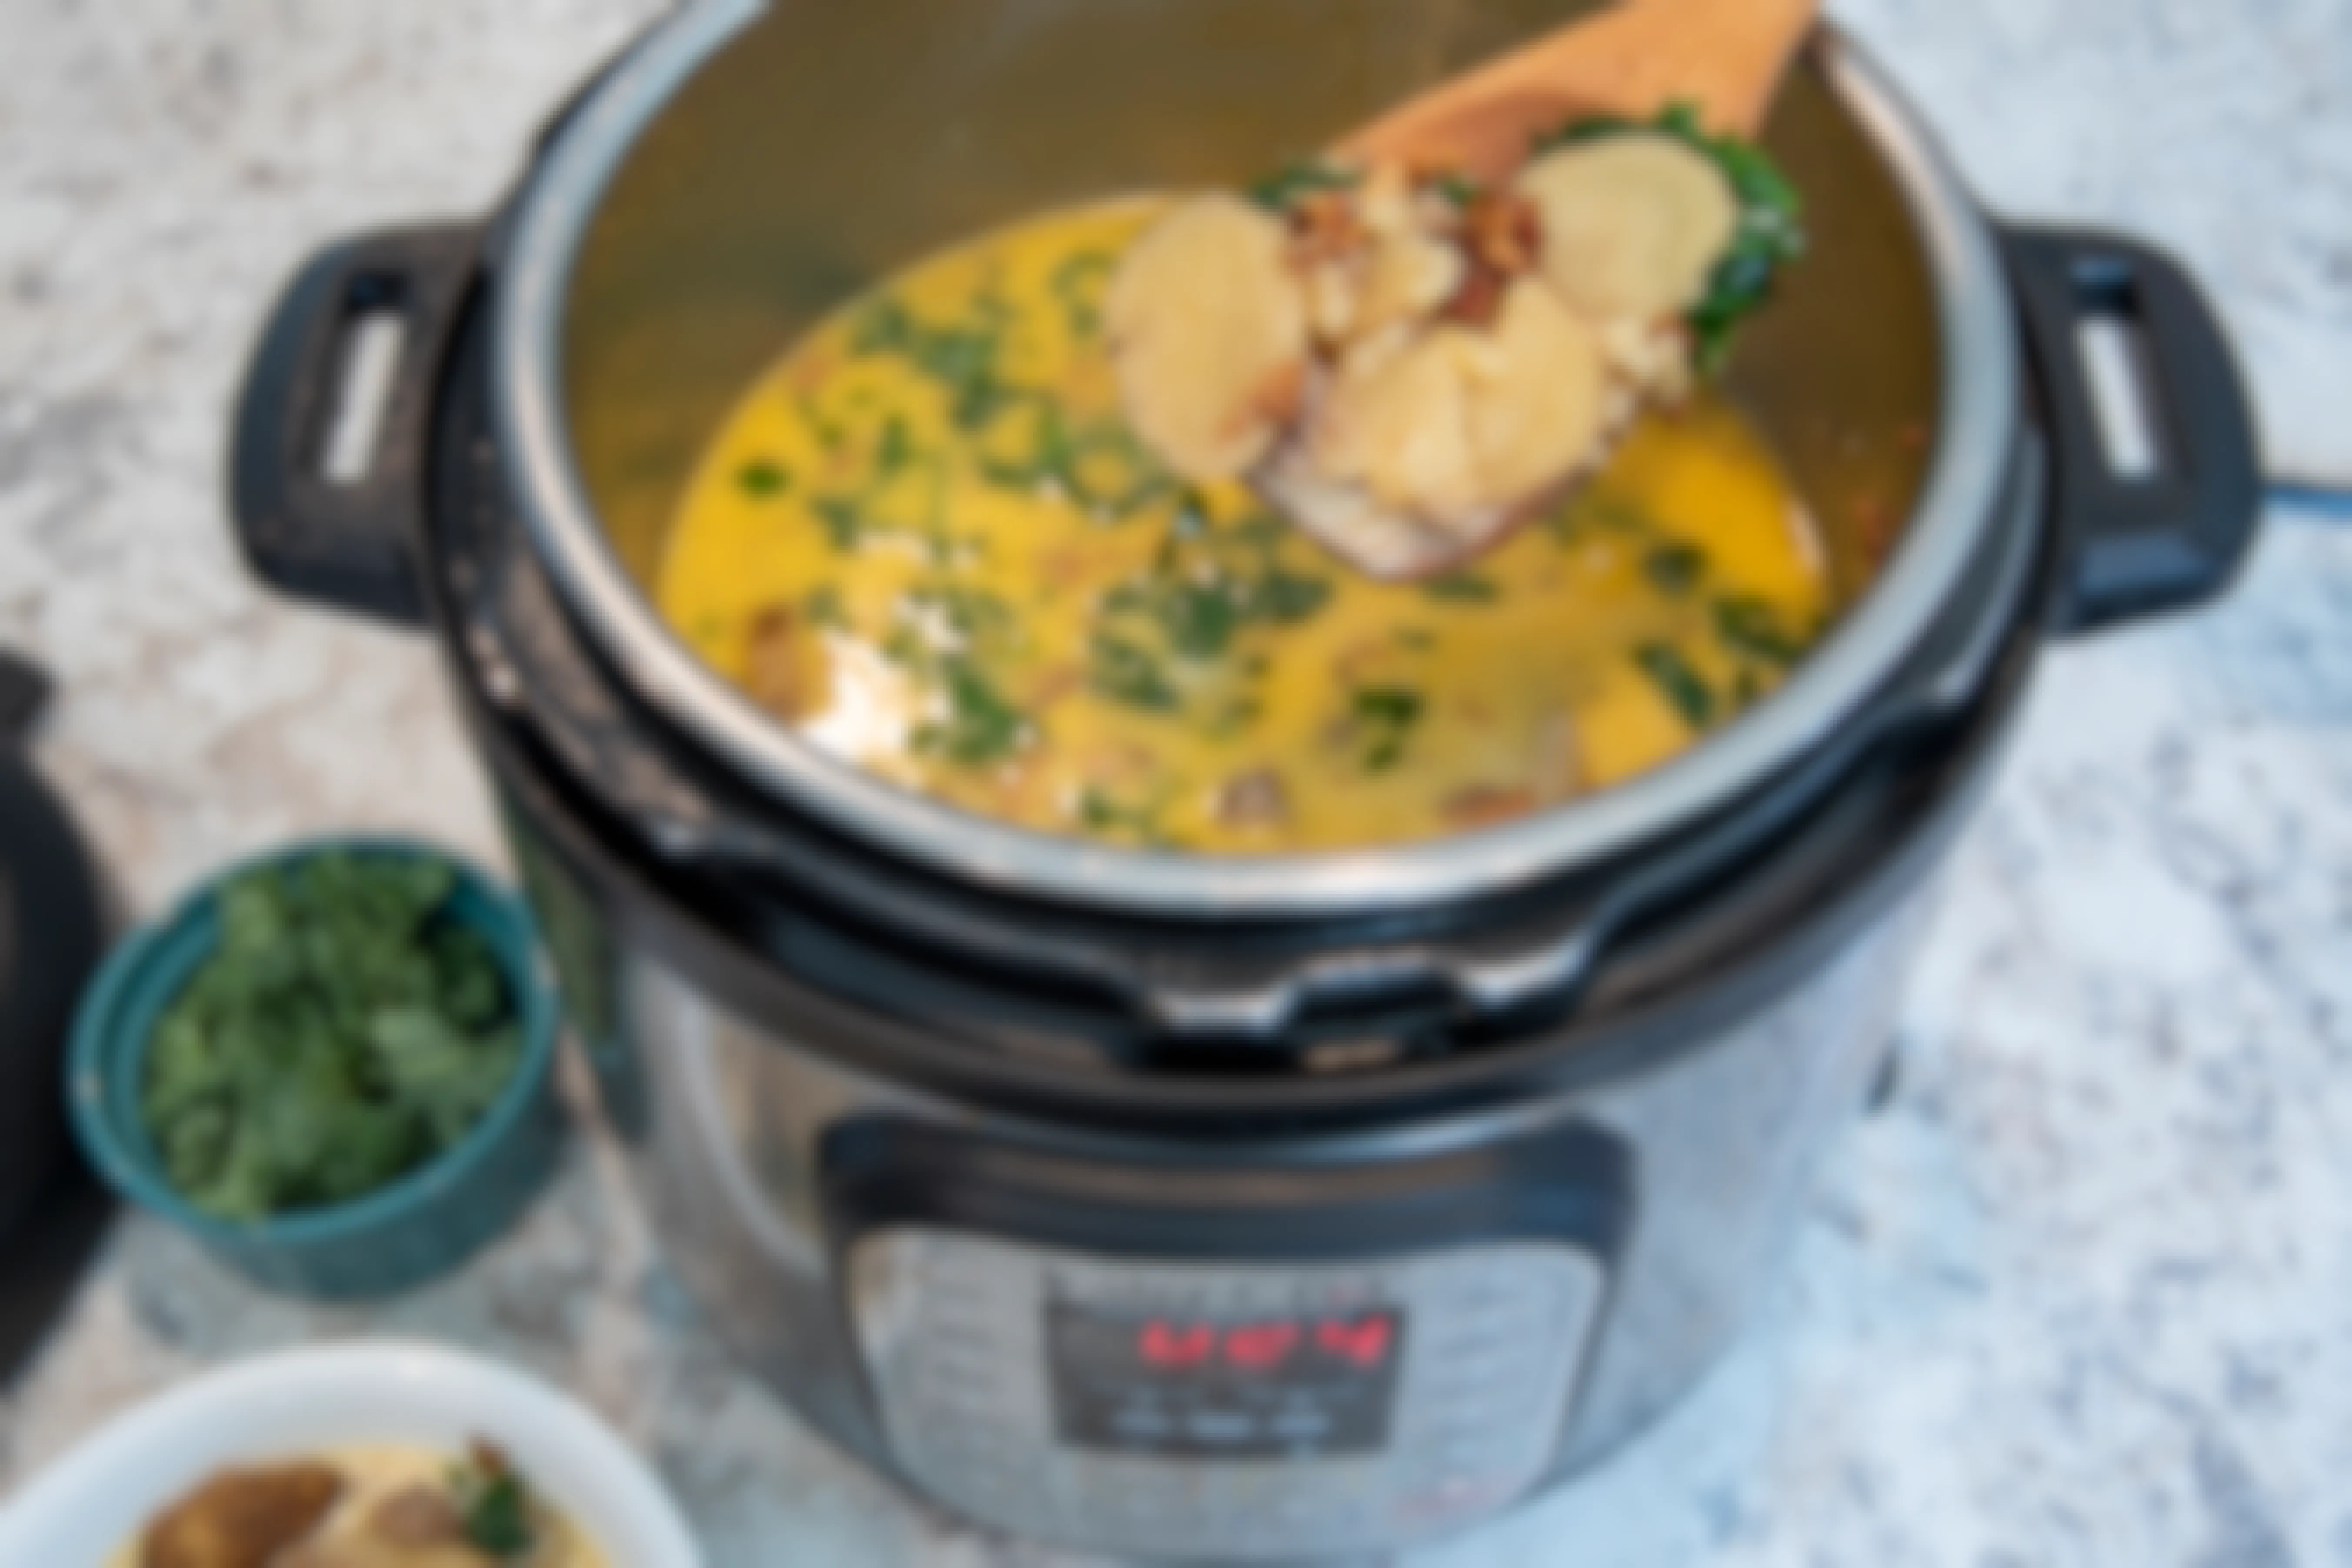 A person ladling soup out of an instant pot